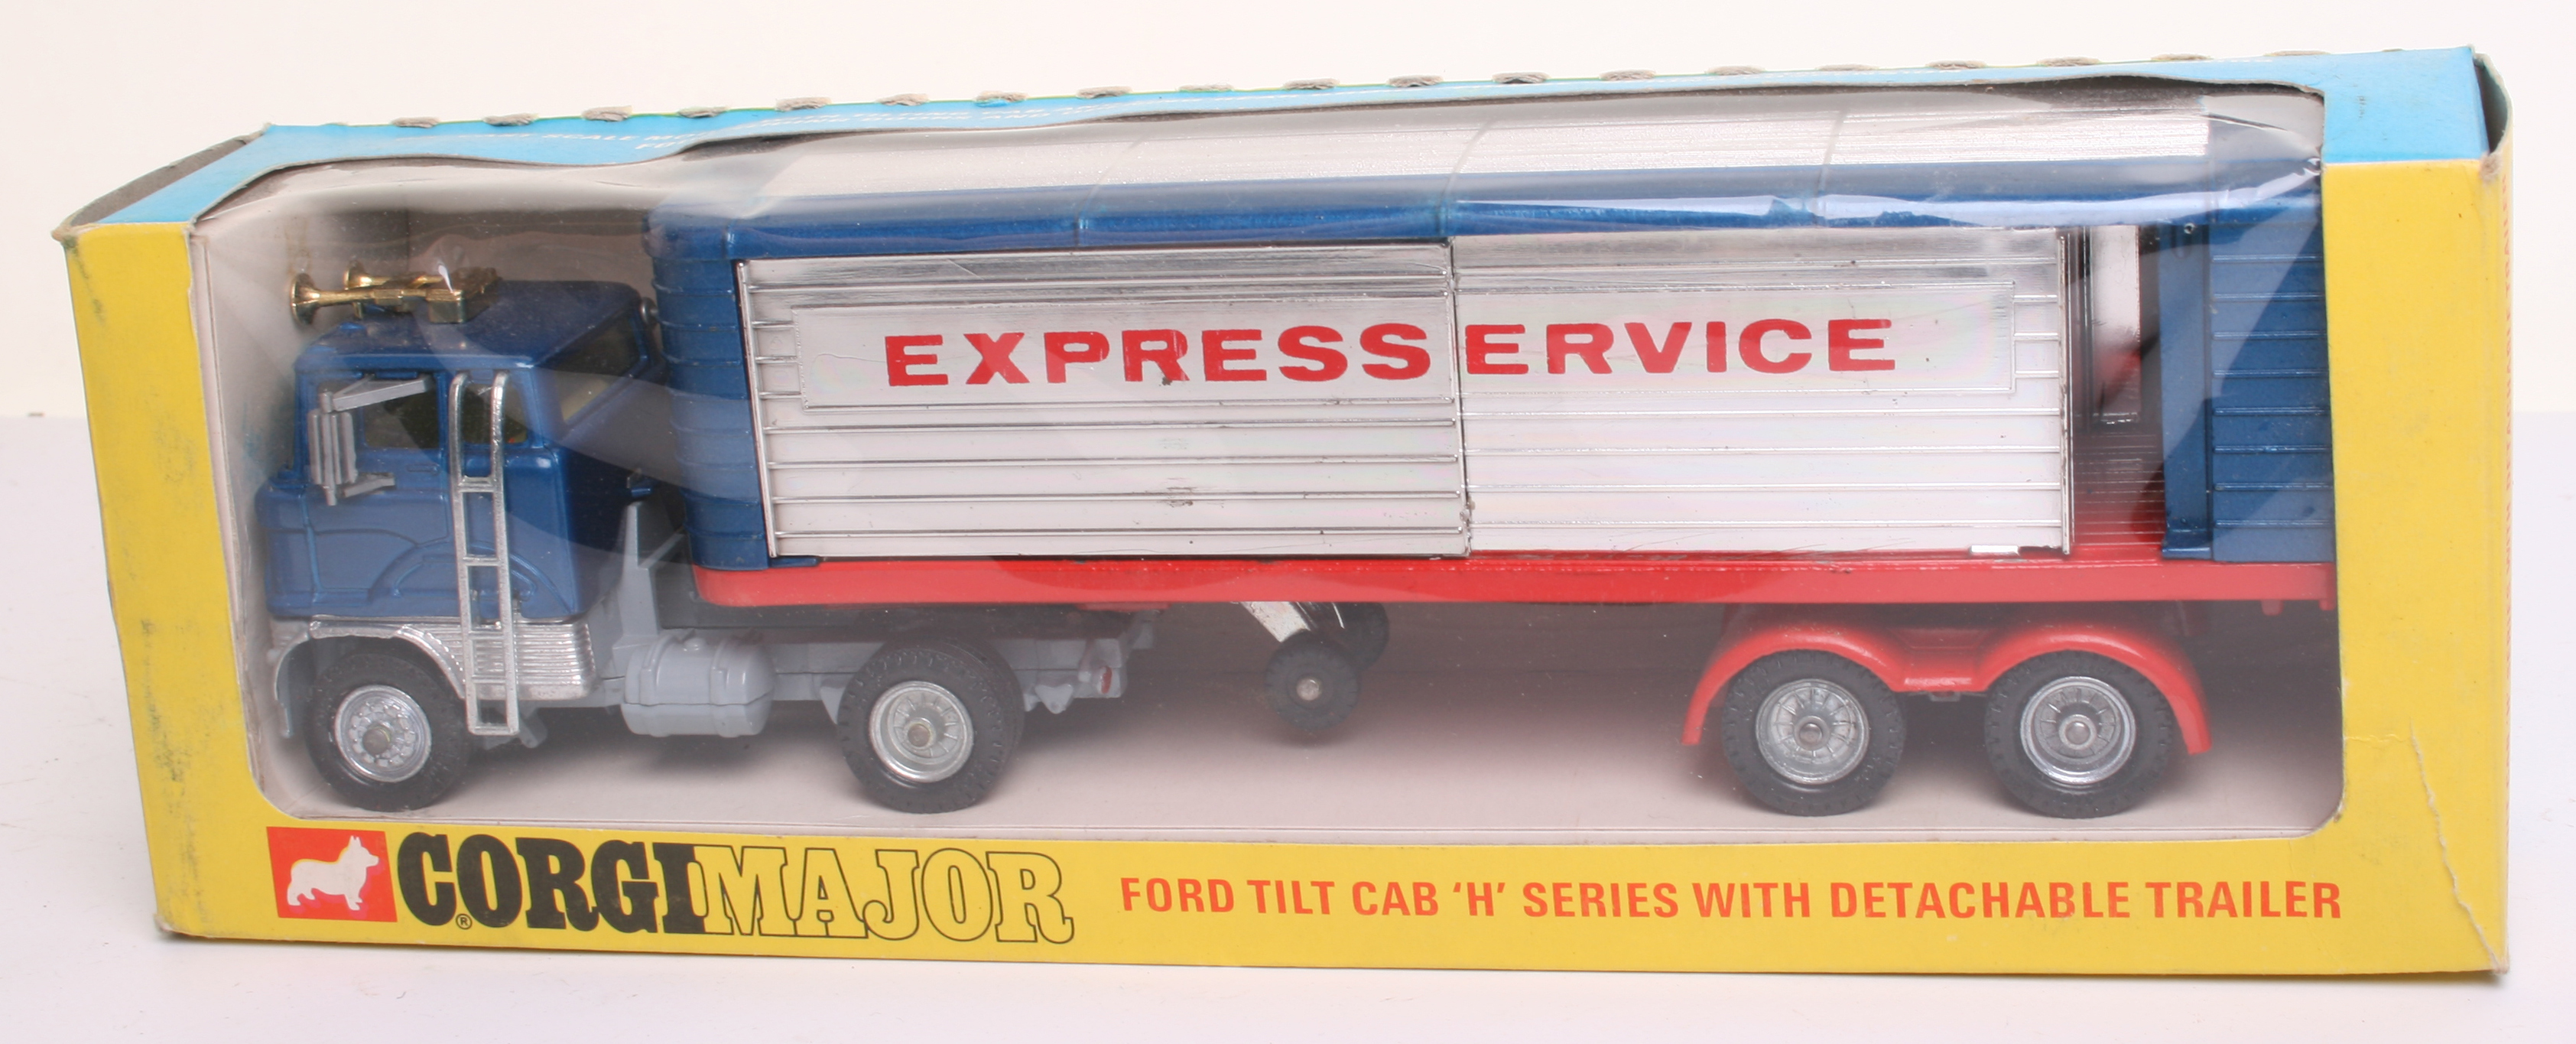 Corgi Major Toys 1137 Ford Articulated Truck “ Express Service” metallic blue/red/silver body,